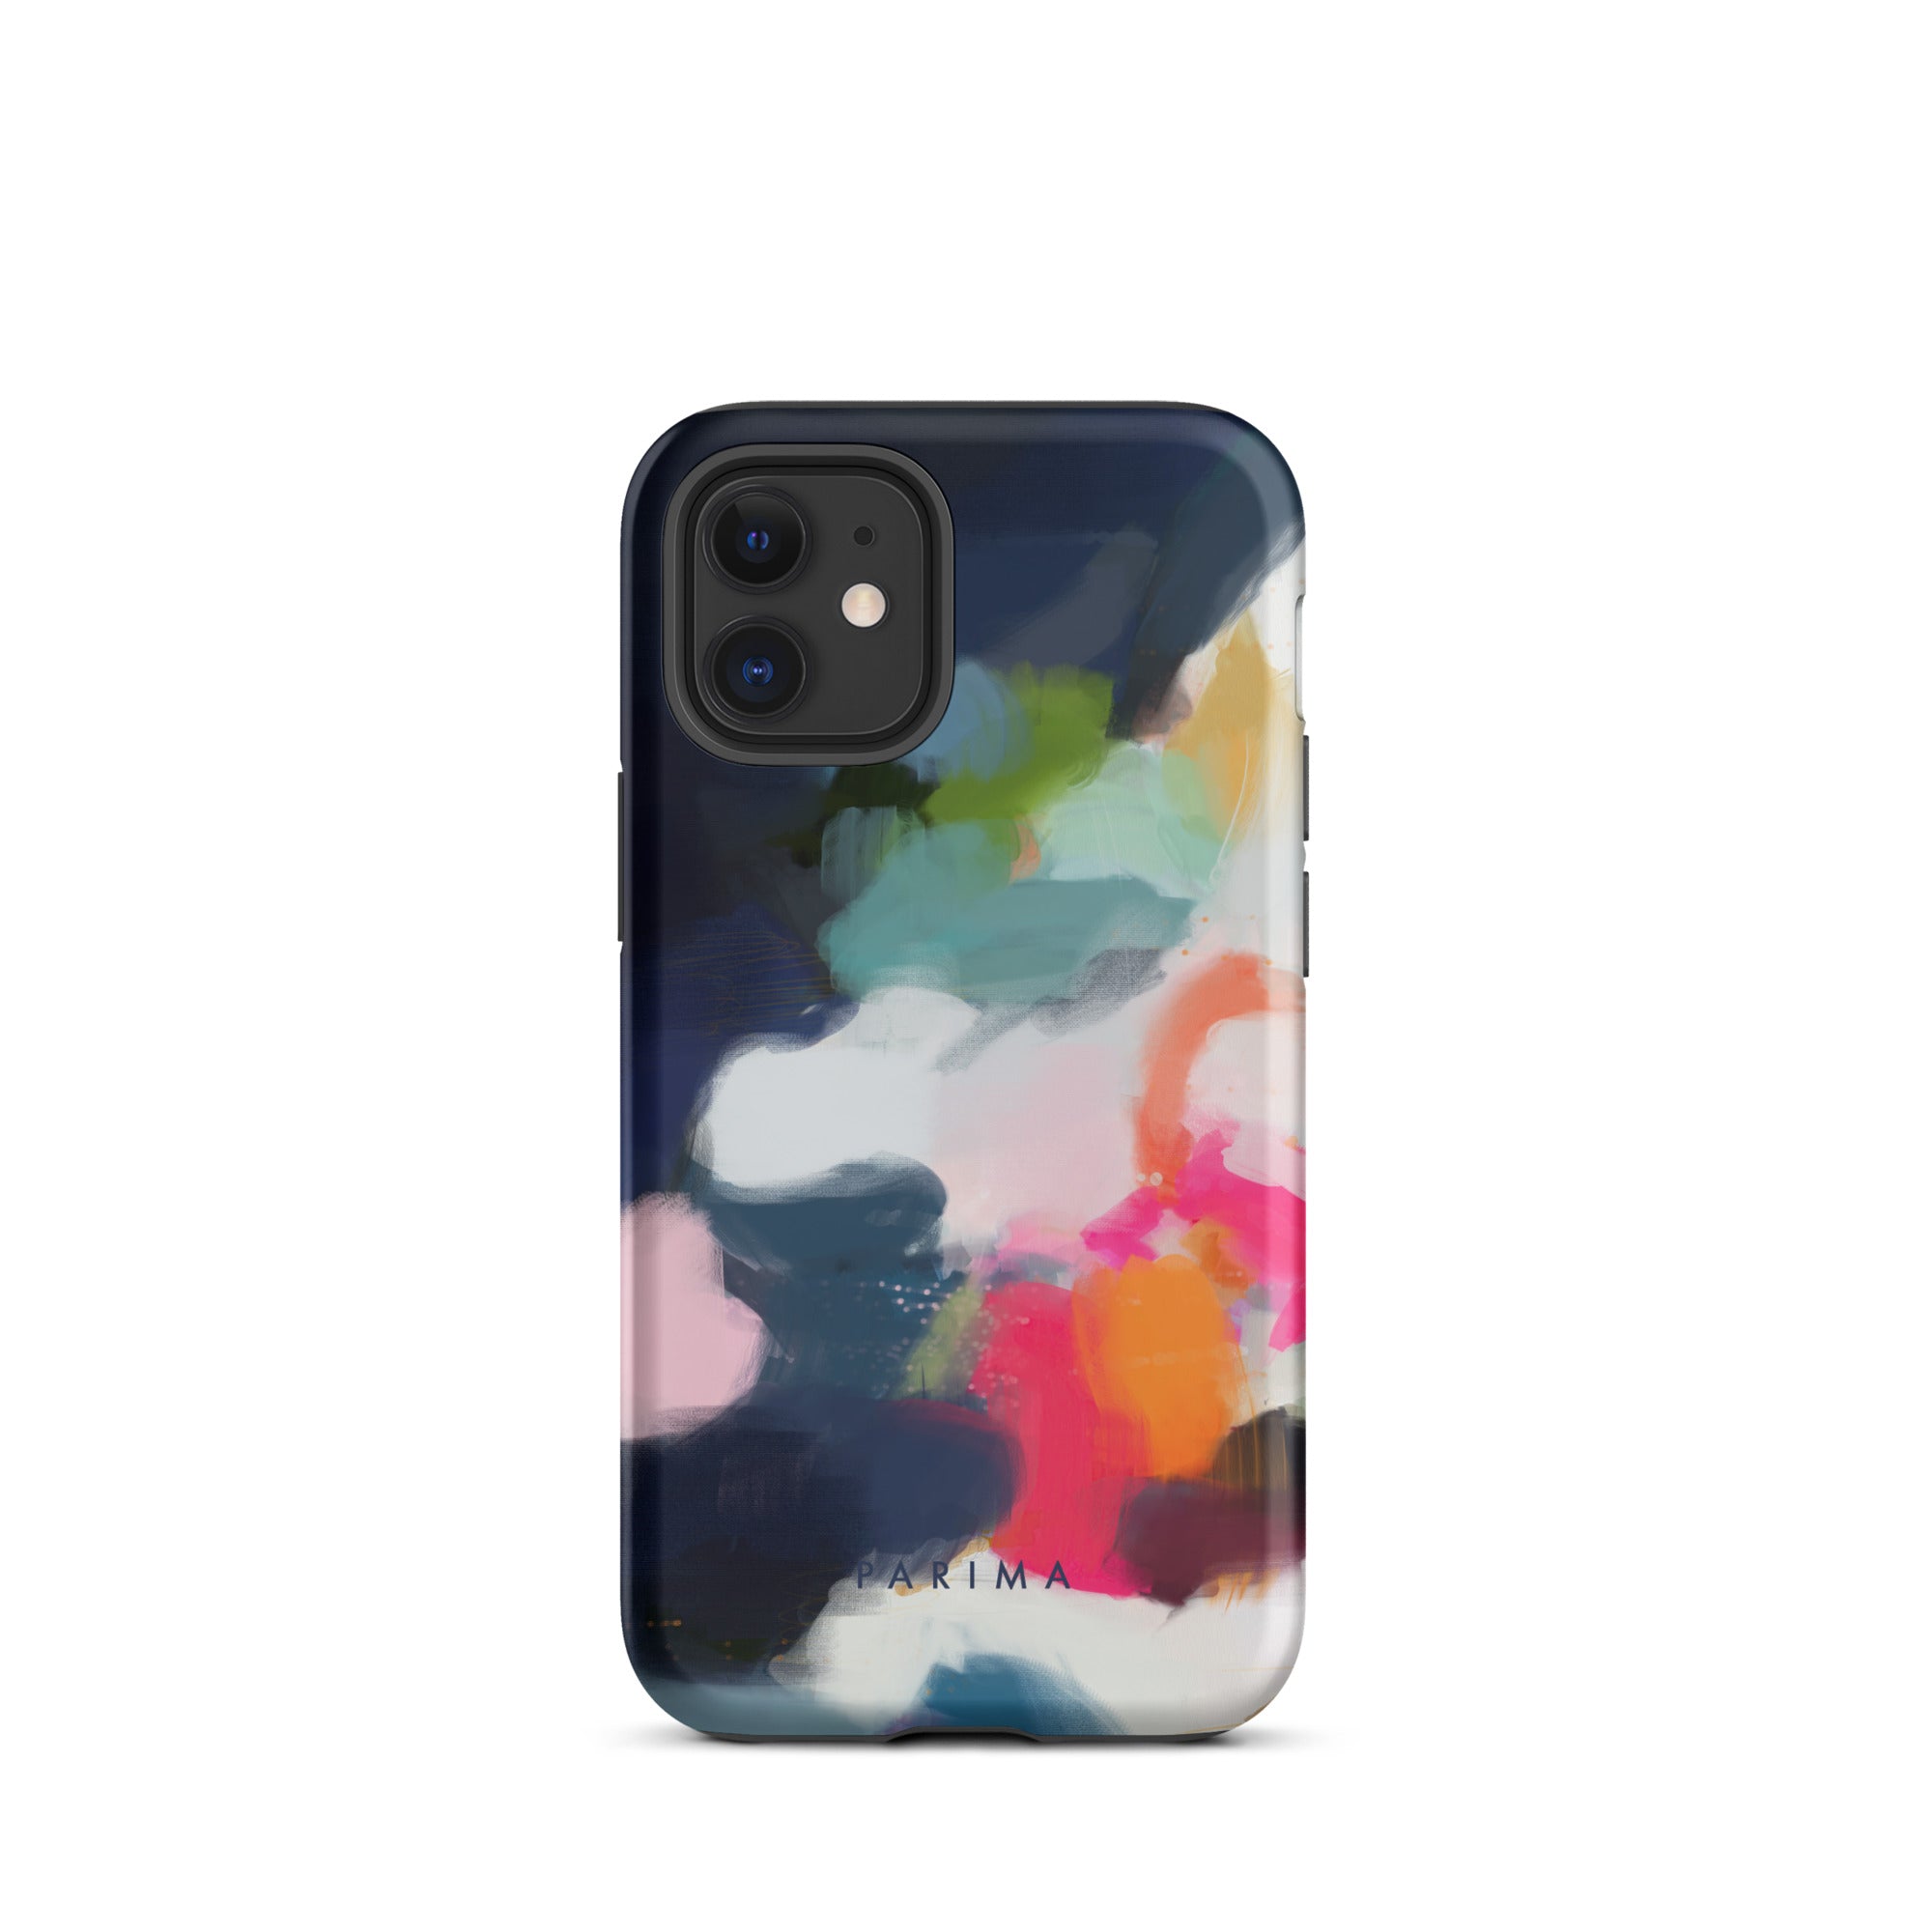 Eliza, pink and blue abstract art - iPhone 12 Mini tough case by Parima Studio